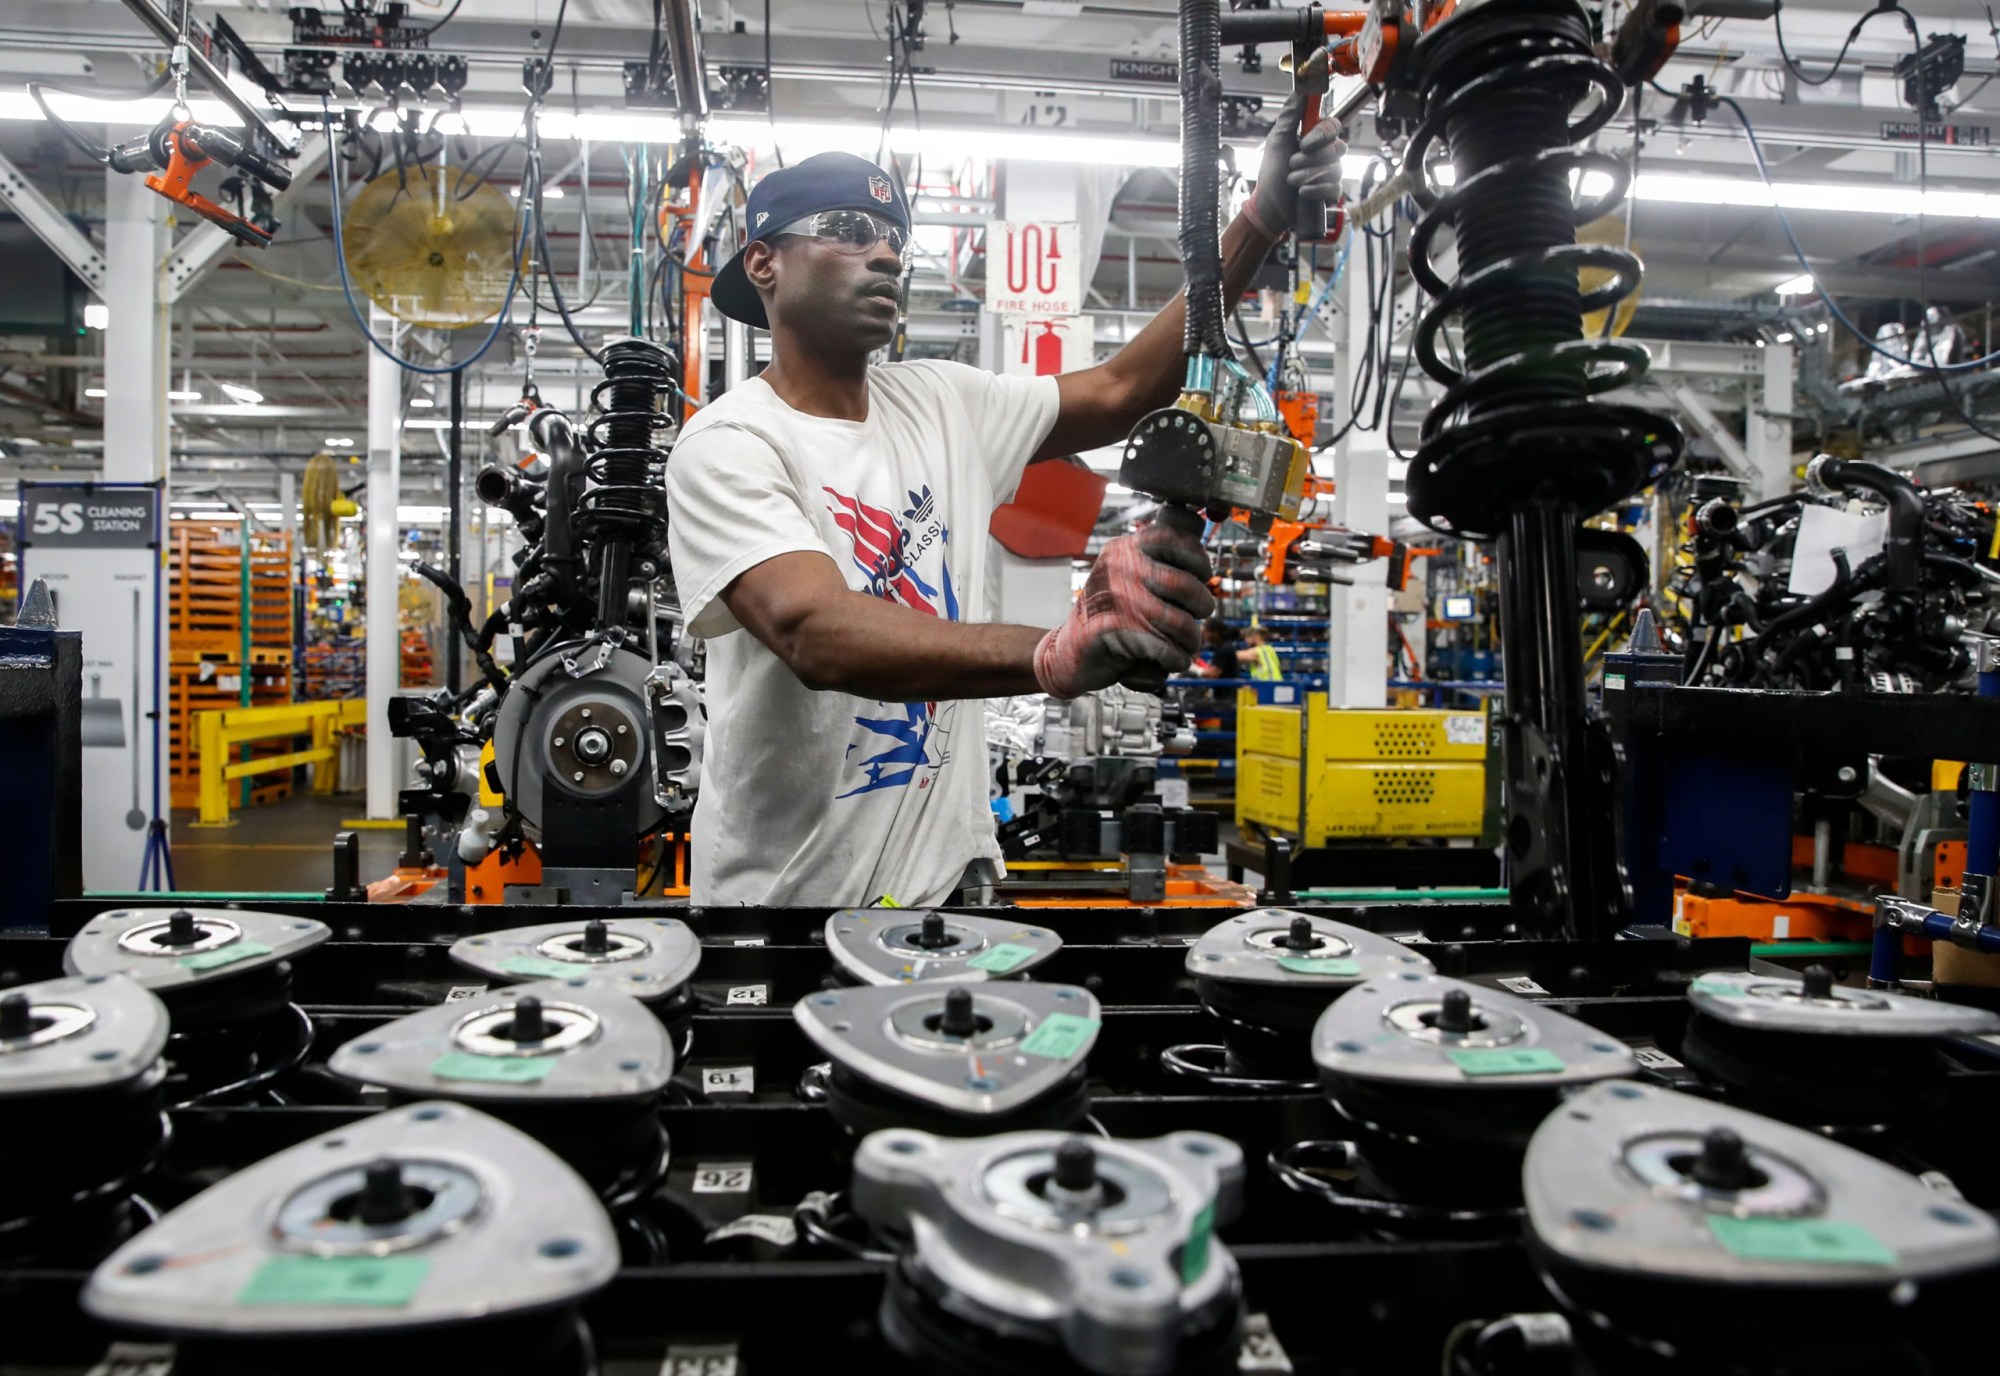 A worker assembles cars at the newly renovated Ford's Assembly Plant in Chicago in June 2019. (Getty/Jim Young)